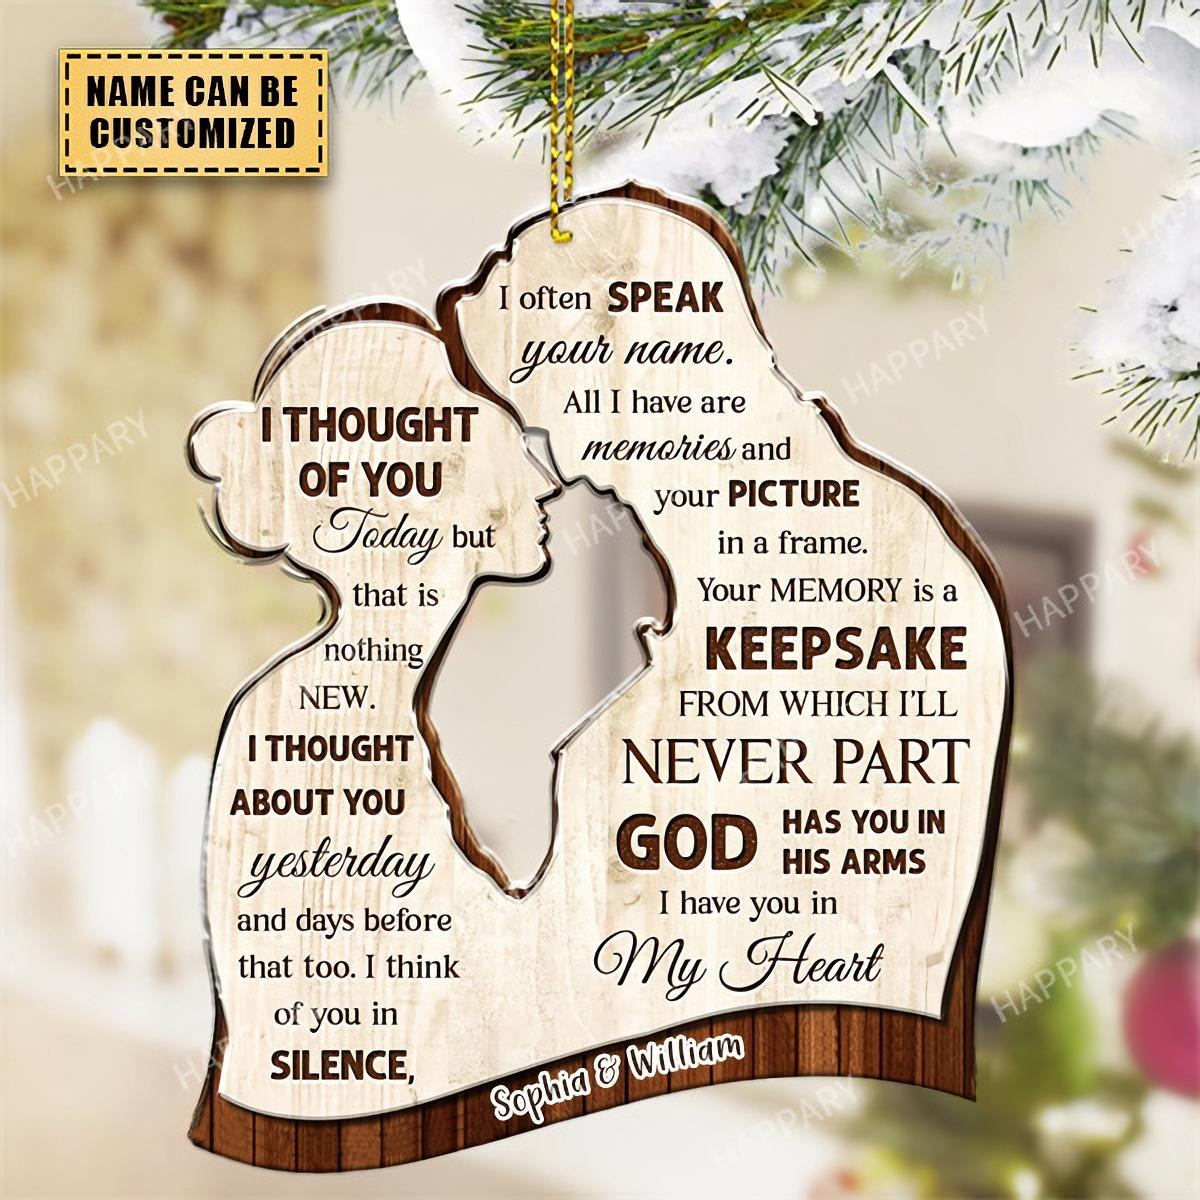 God Has You in His Arms I Have You in My Heart - Personalized Wooden Ornament